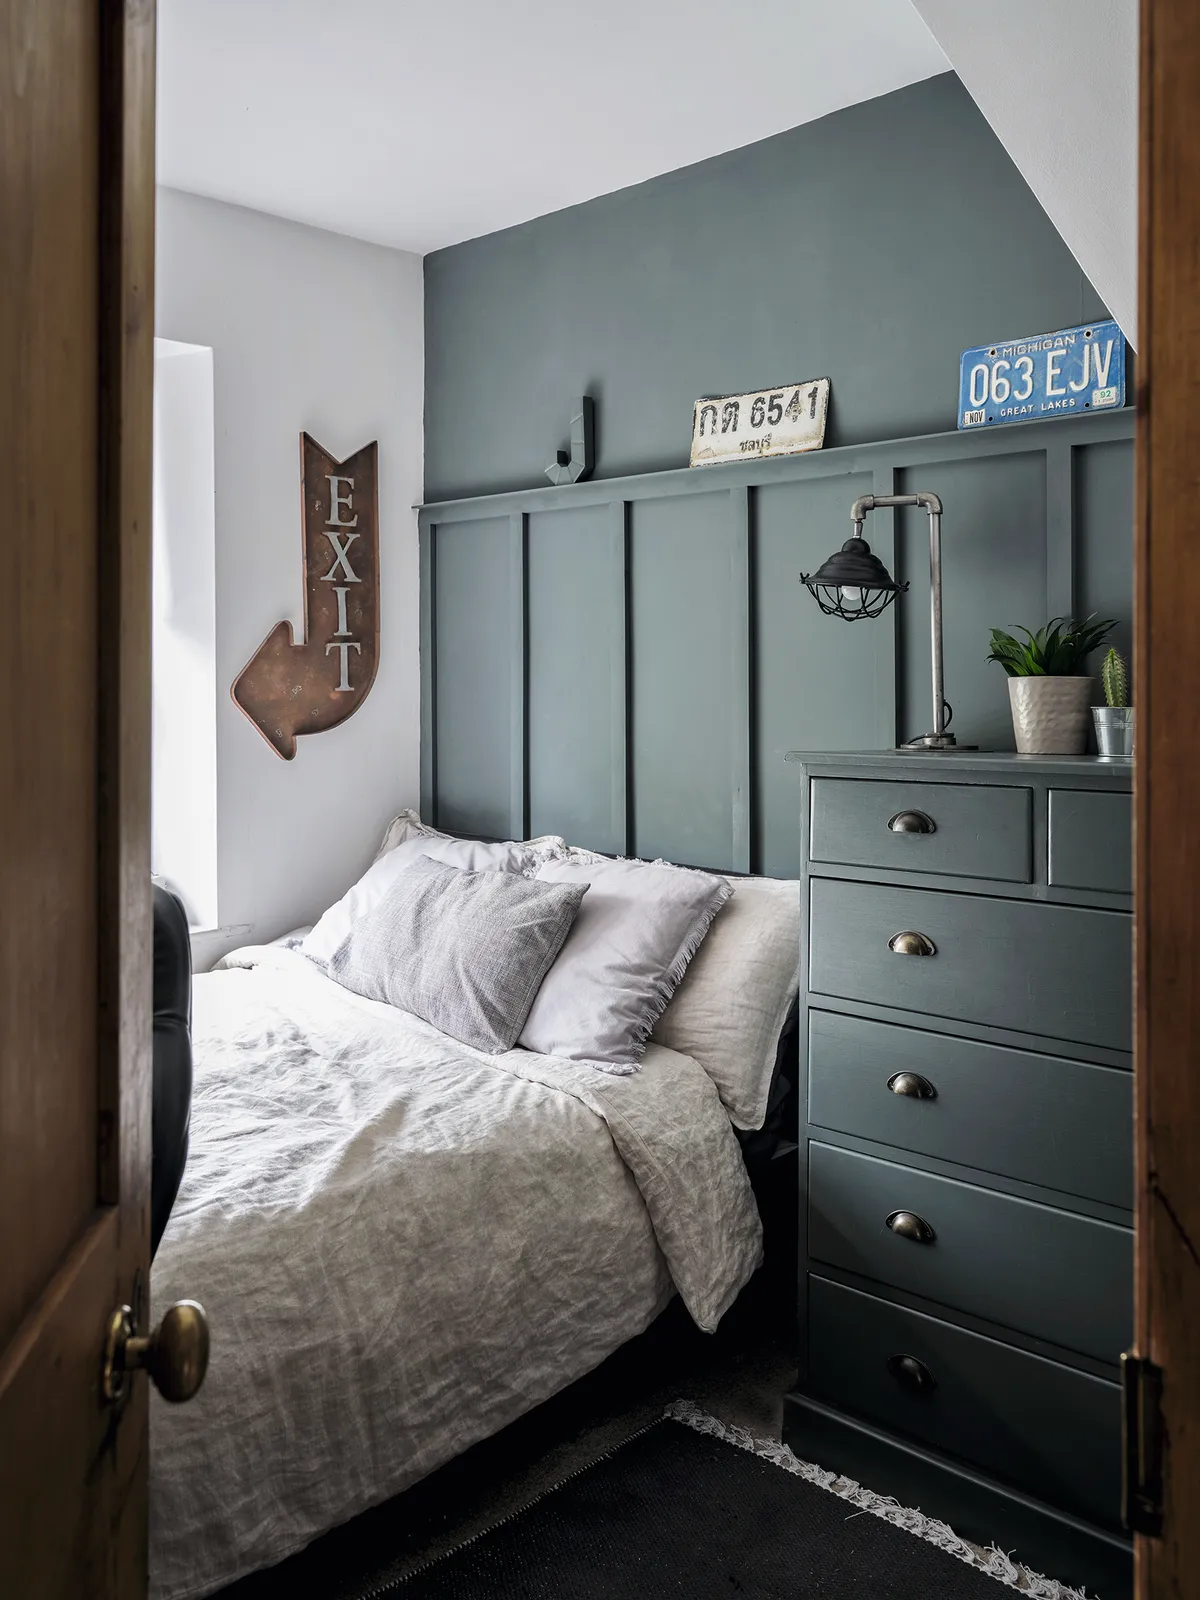 Ali’s choice of charcoal paint, rather than flat black, softens her monochrome scheme. As always, she’s filled it with vintage finds – but has swapped shabby- chic for cool, industrial style in this room